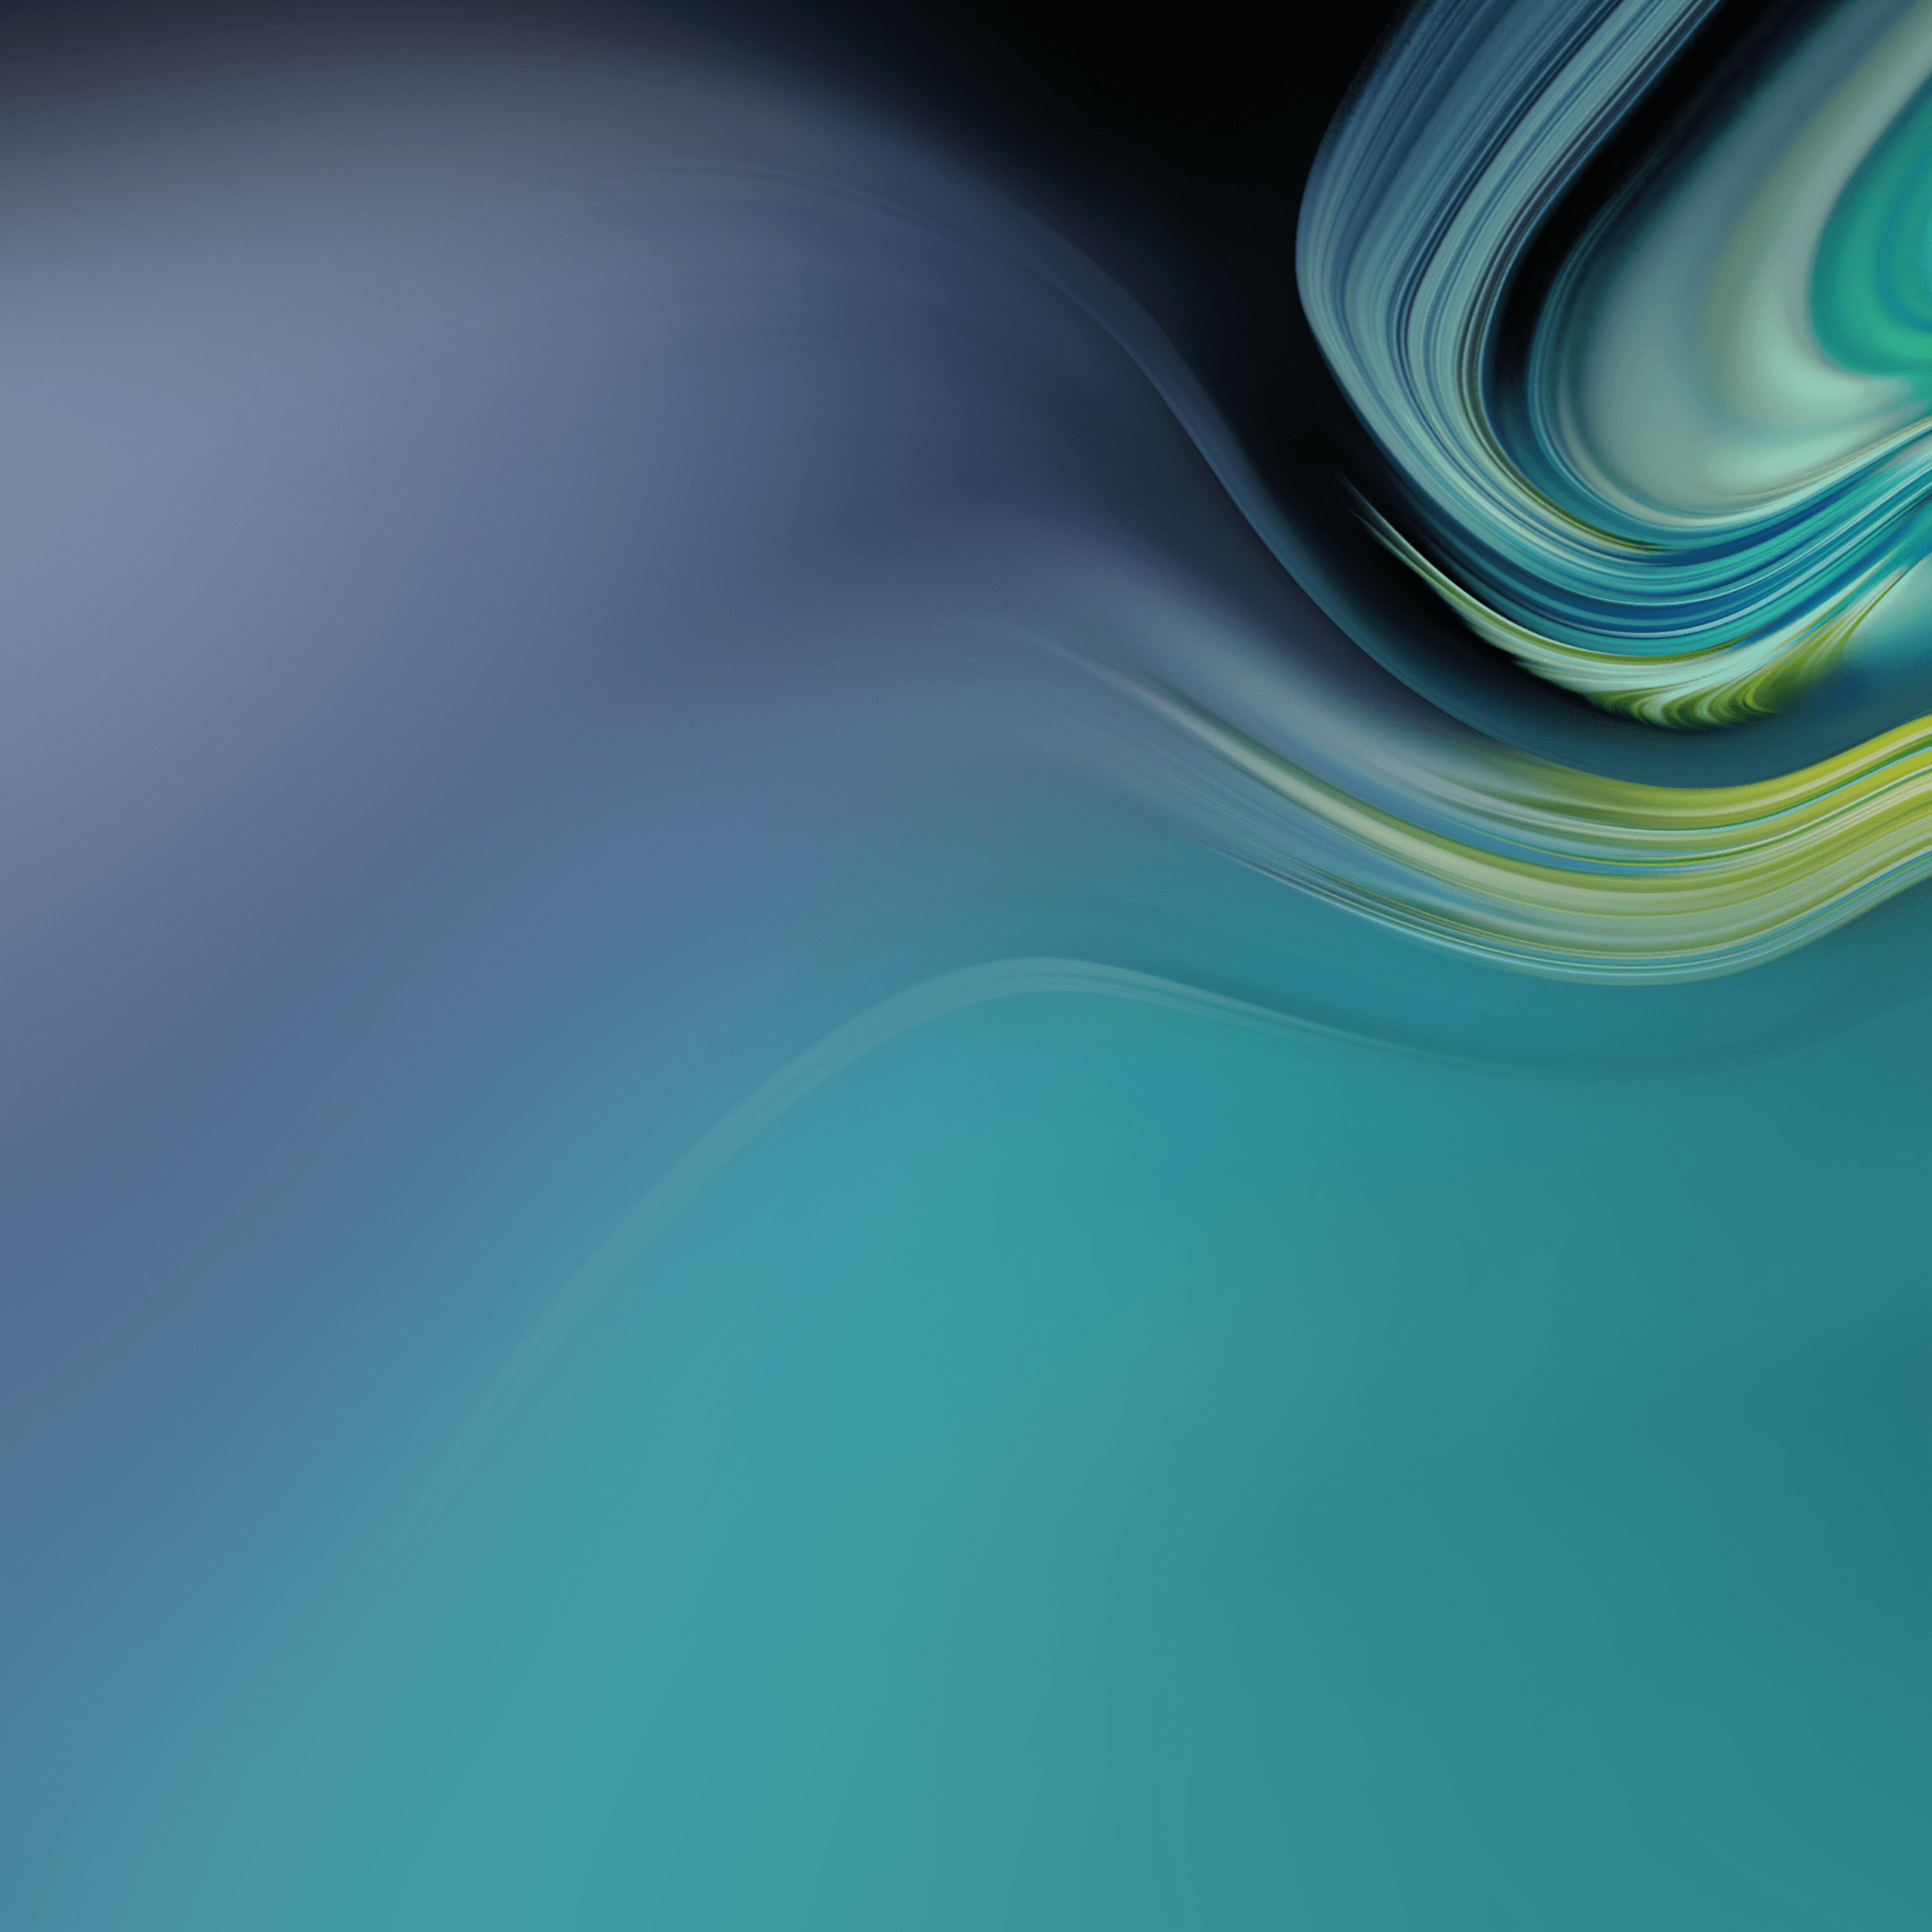 Galaxy Tab S4 wallpapers are here for your viewing pleasure